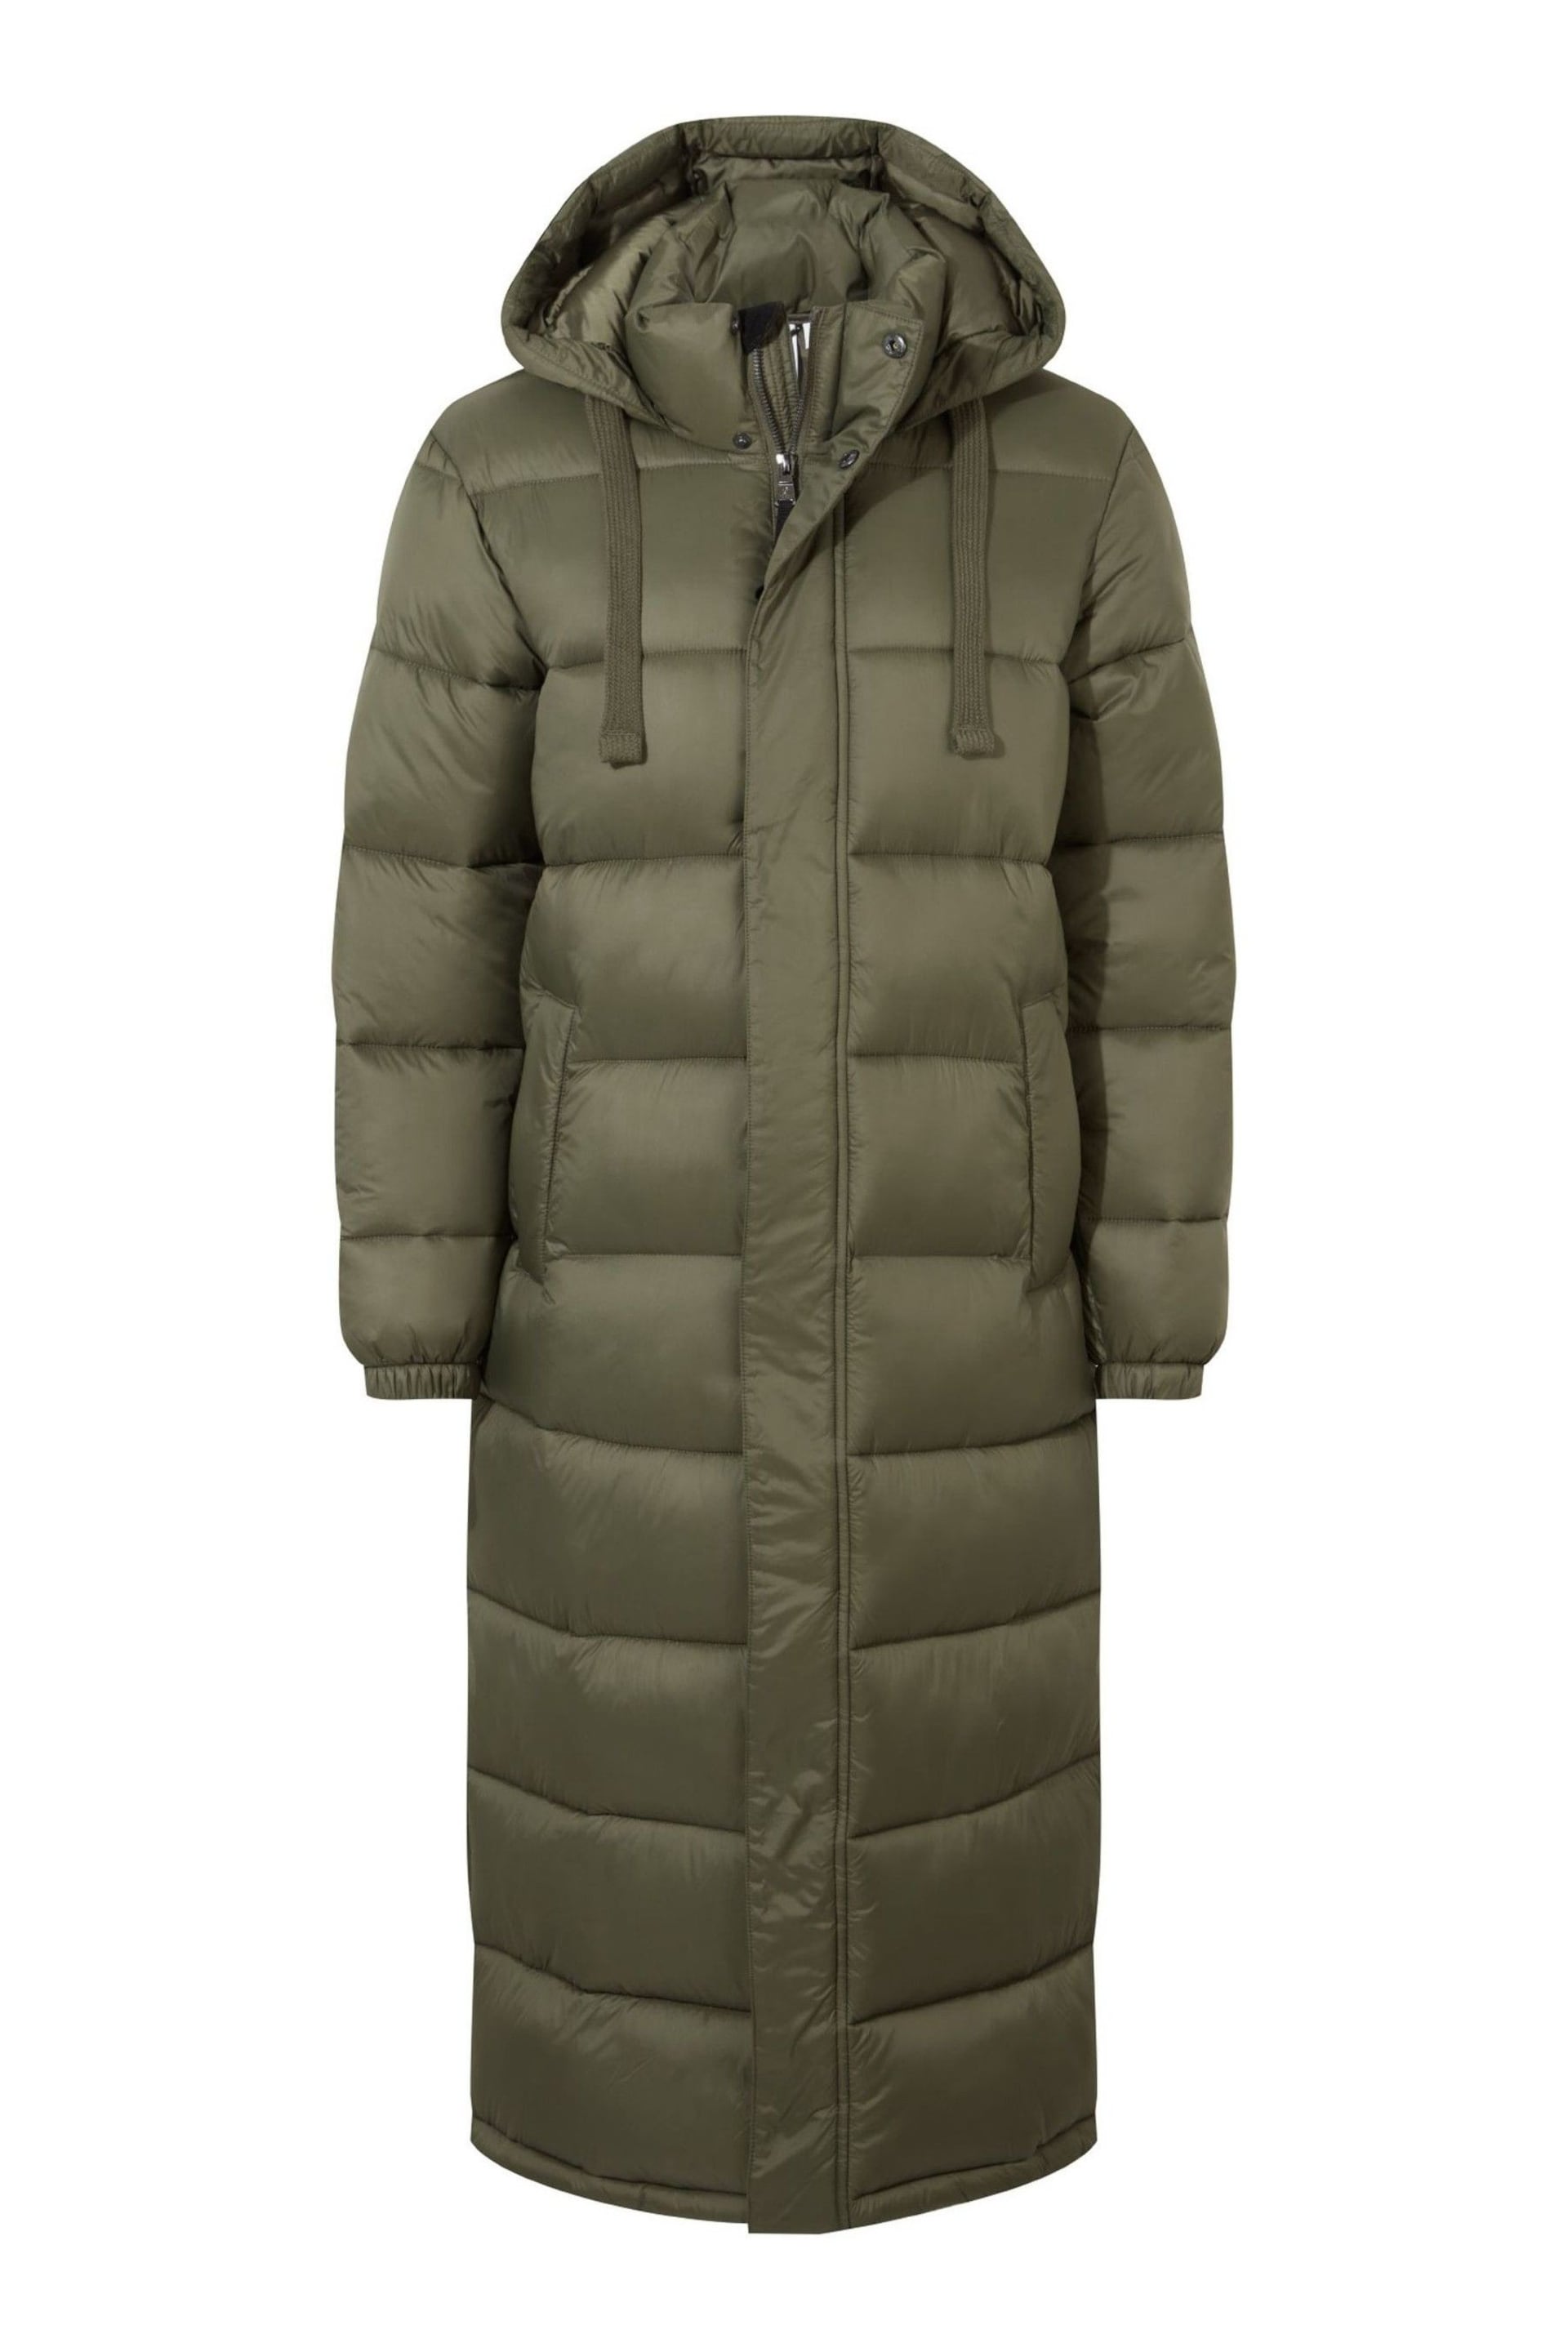 Tog 24 Green Cautley Long Padded Jacket - Image 9 of 9